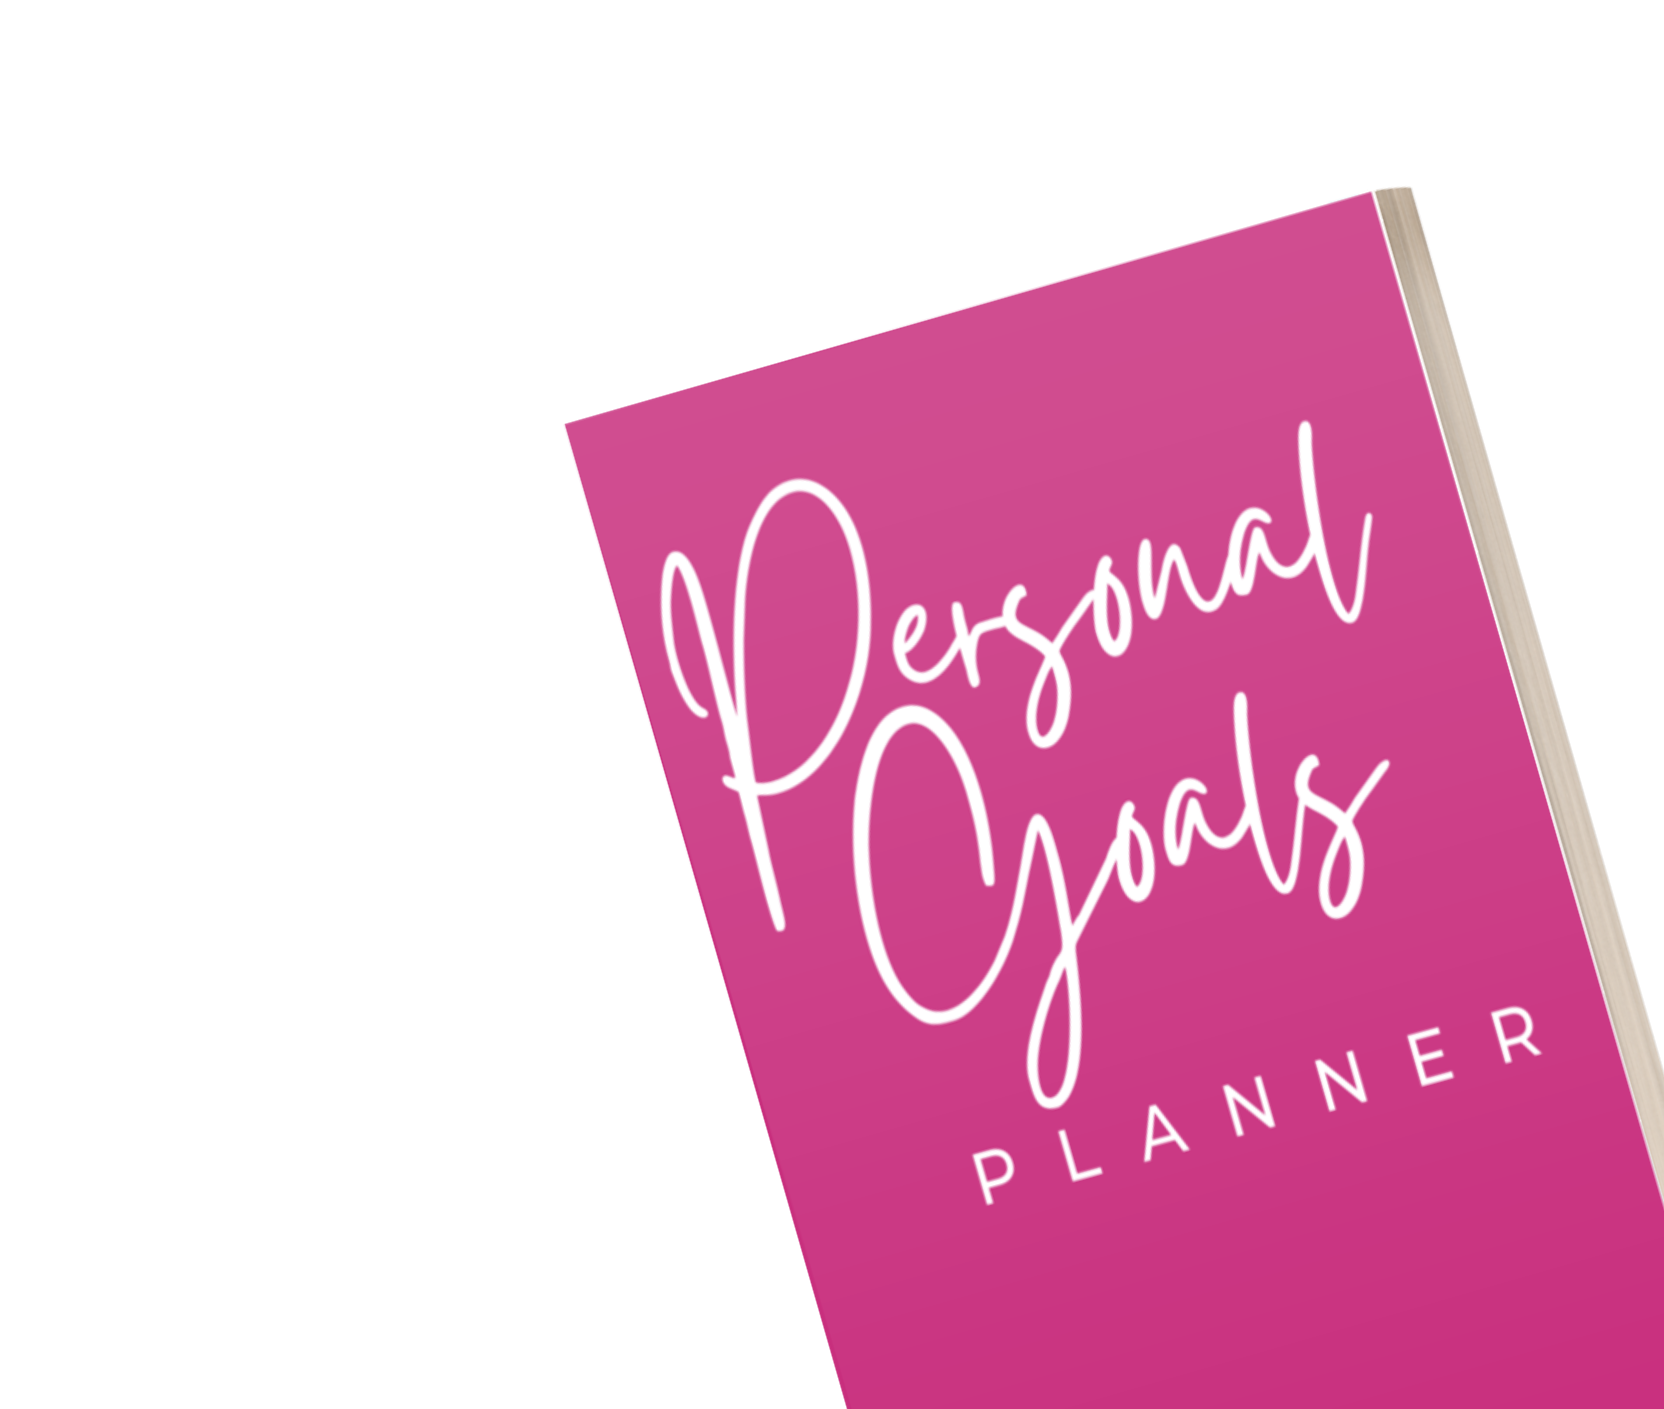 Personal Goals Planner - Done For Your Toolbox